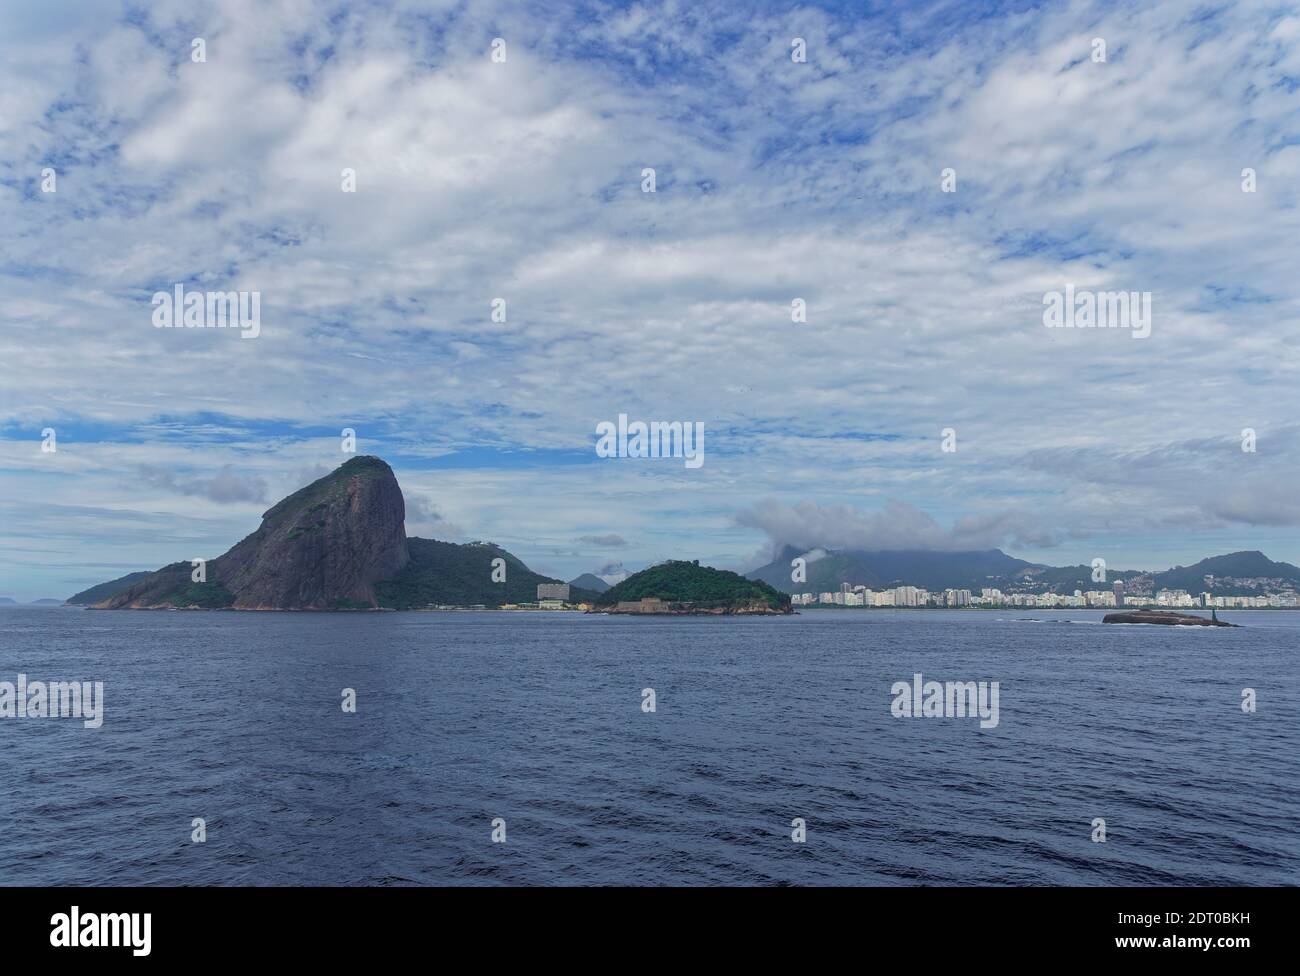 Copacabana beach visible from a Vessel heading in to the Port of Rio, overlooked by the dramatic mountain of Pedra da Gavea. Stock Photo